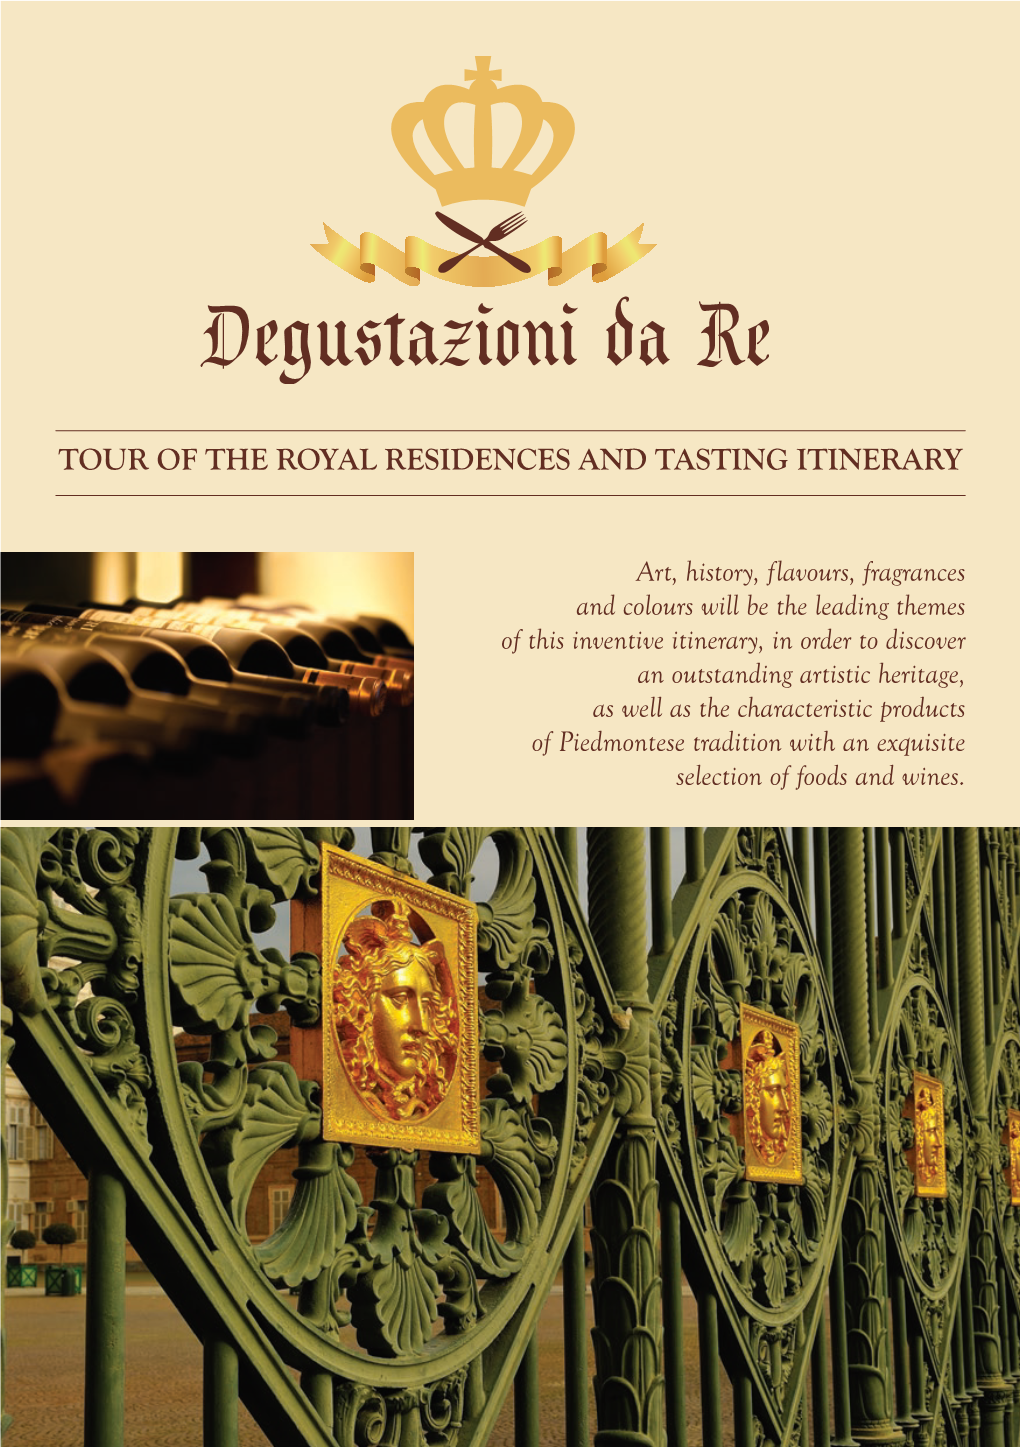 Tour of the Royal Residences and Tasting Itinerary